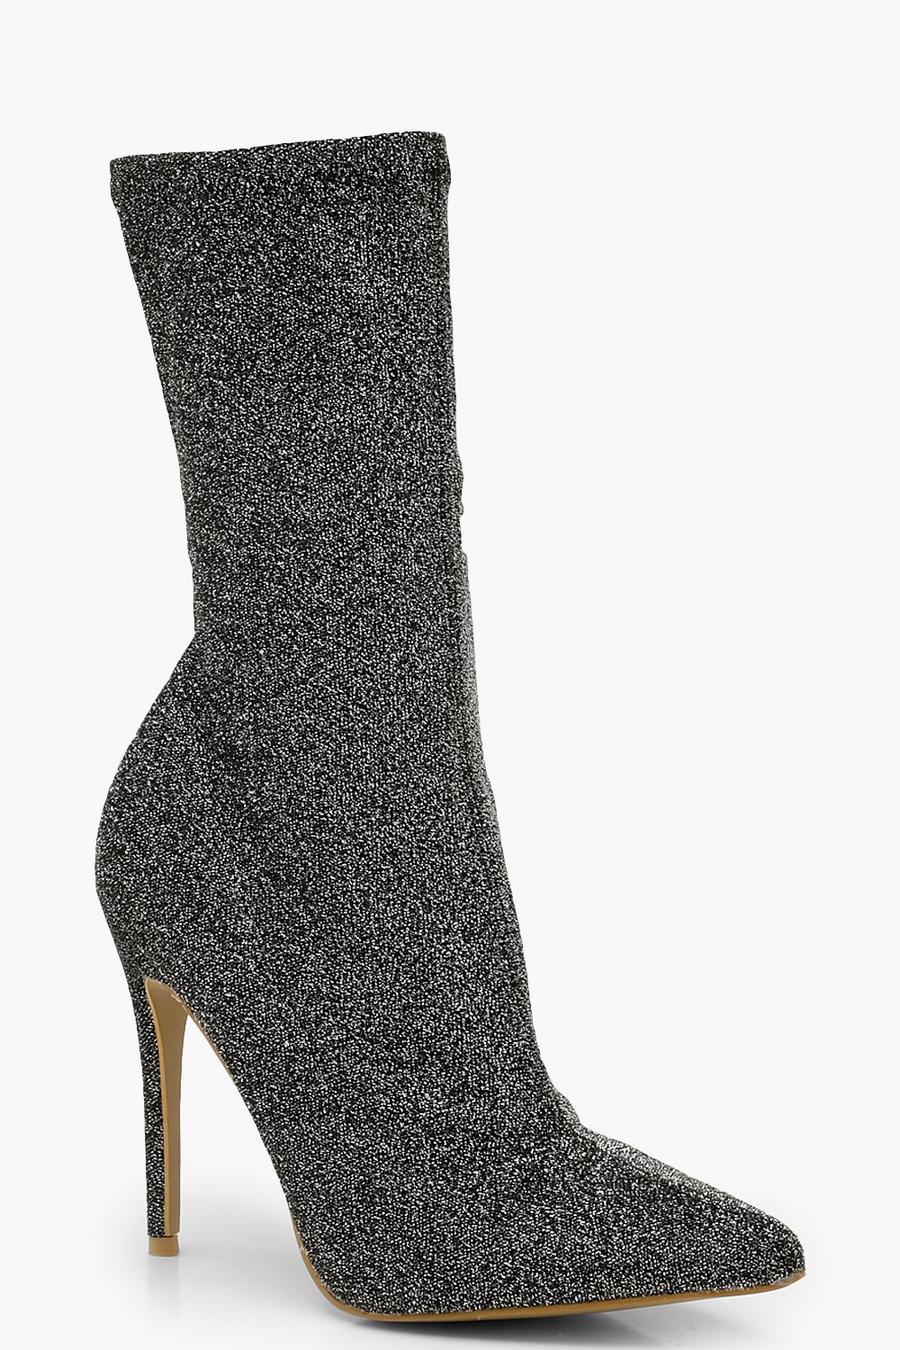 Grey Pointed Toe Stiletto Heel Sock Boots image number 1